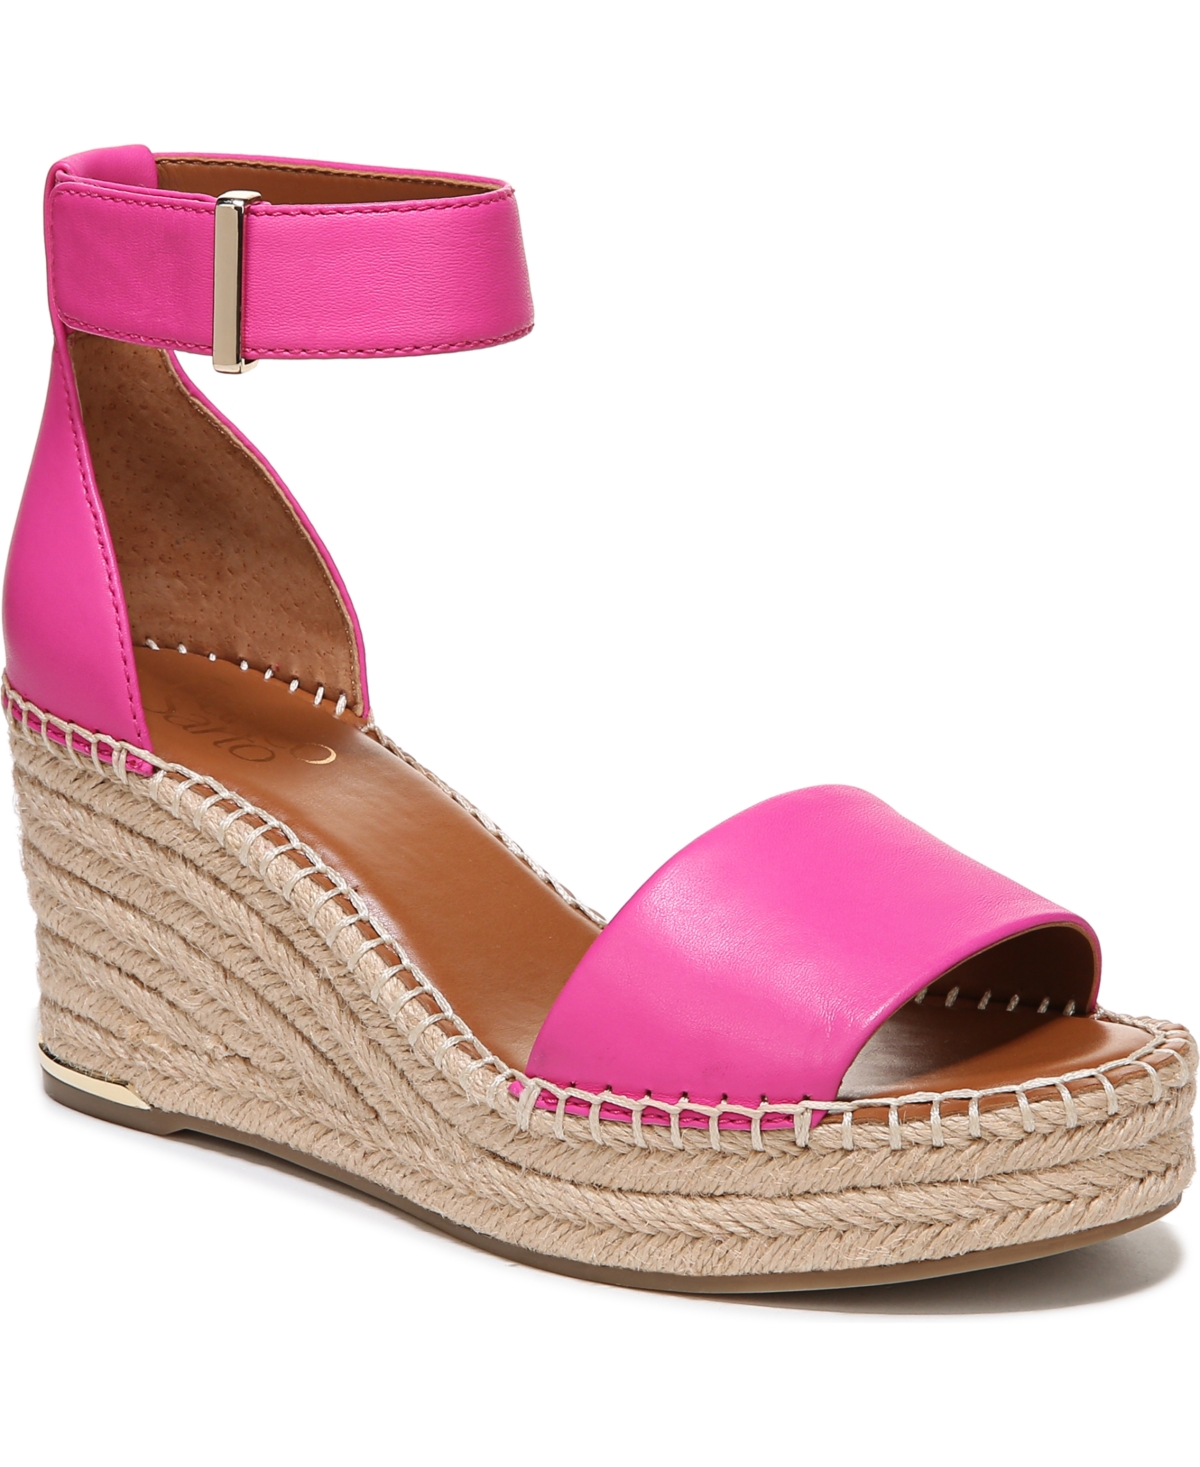 UPC 017113869776 product image for Franco Sarto Clemens Espadrille Wedge Sandals Women's Shoes | upcitemdb.com